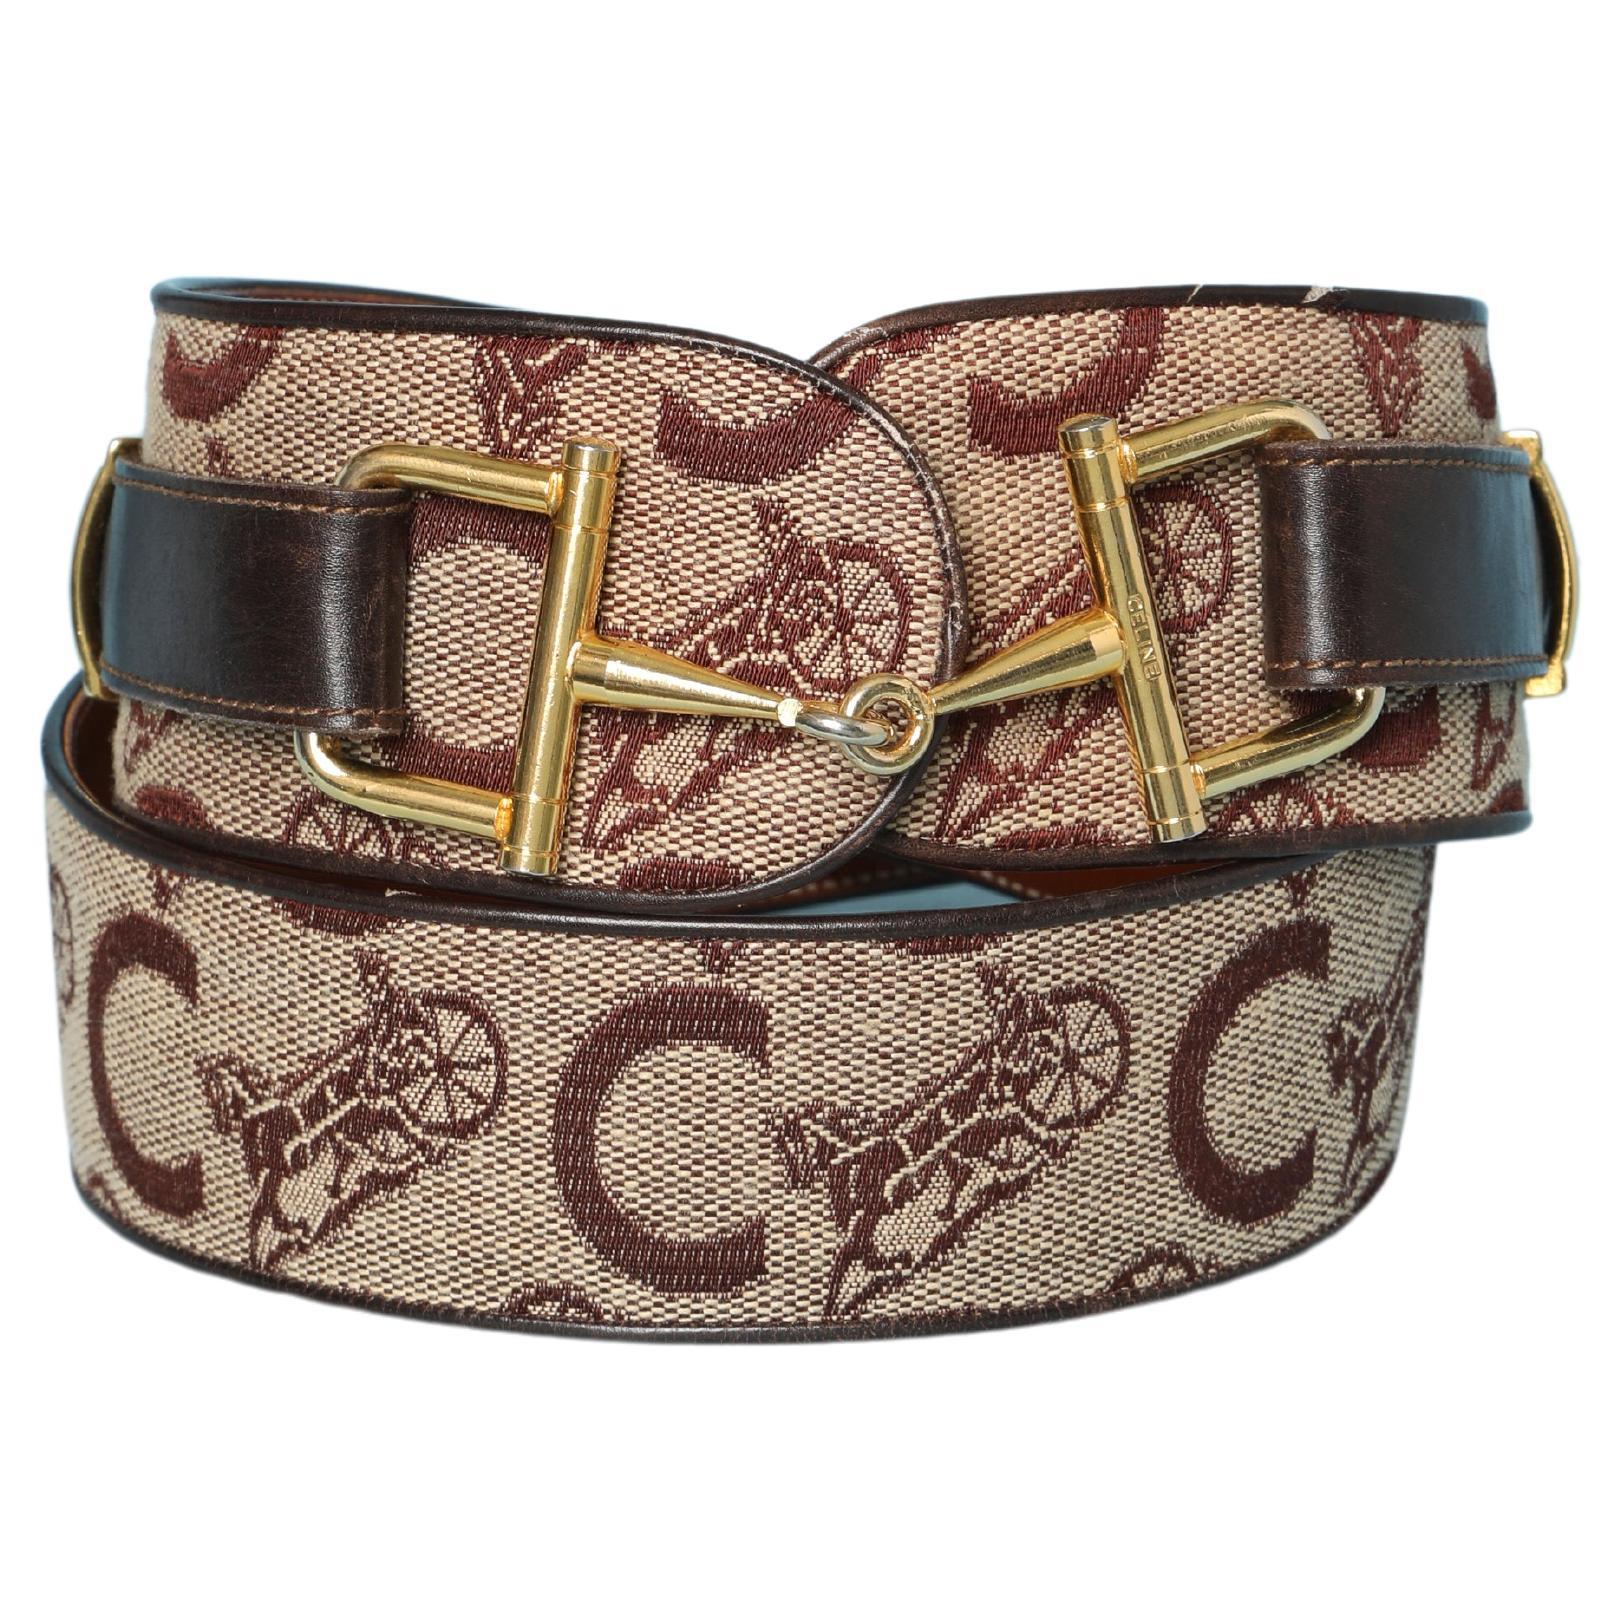 Monogram branded belt with metal bit in cotton and leather Céline